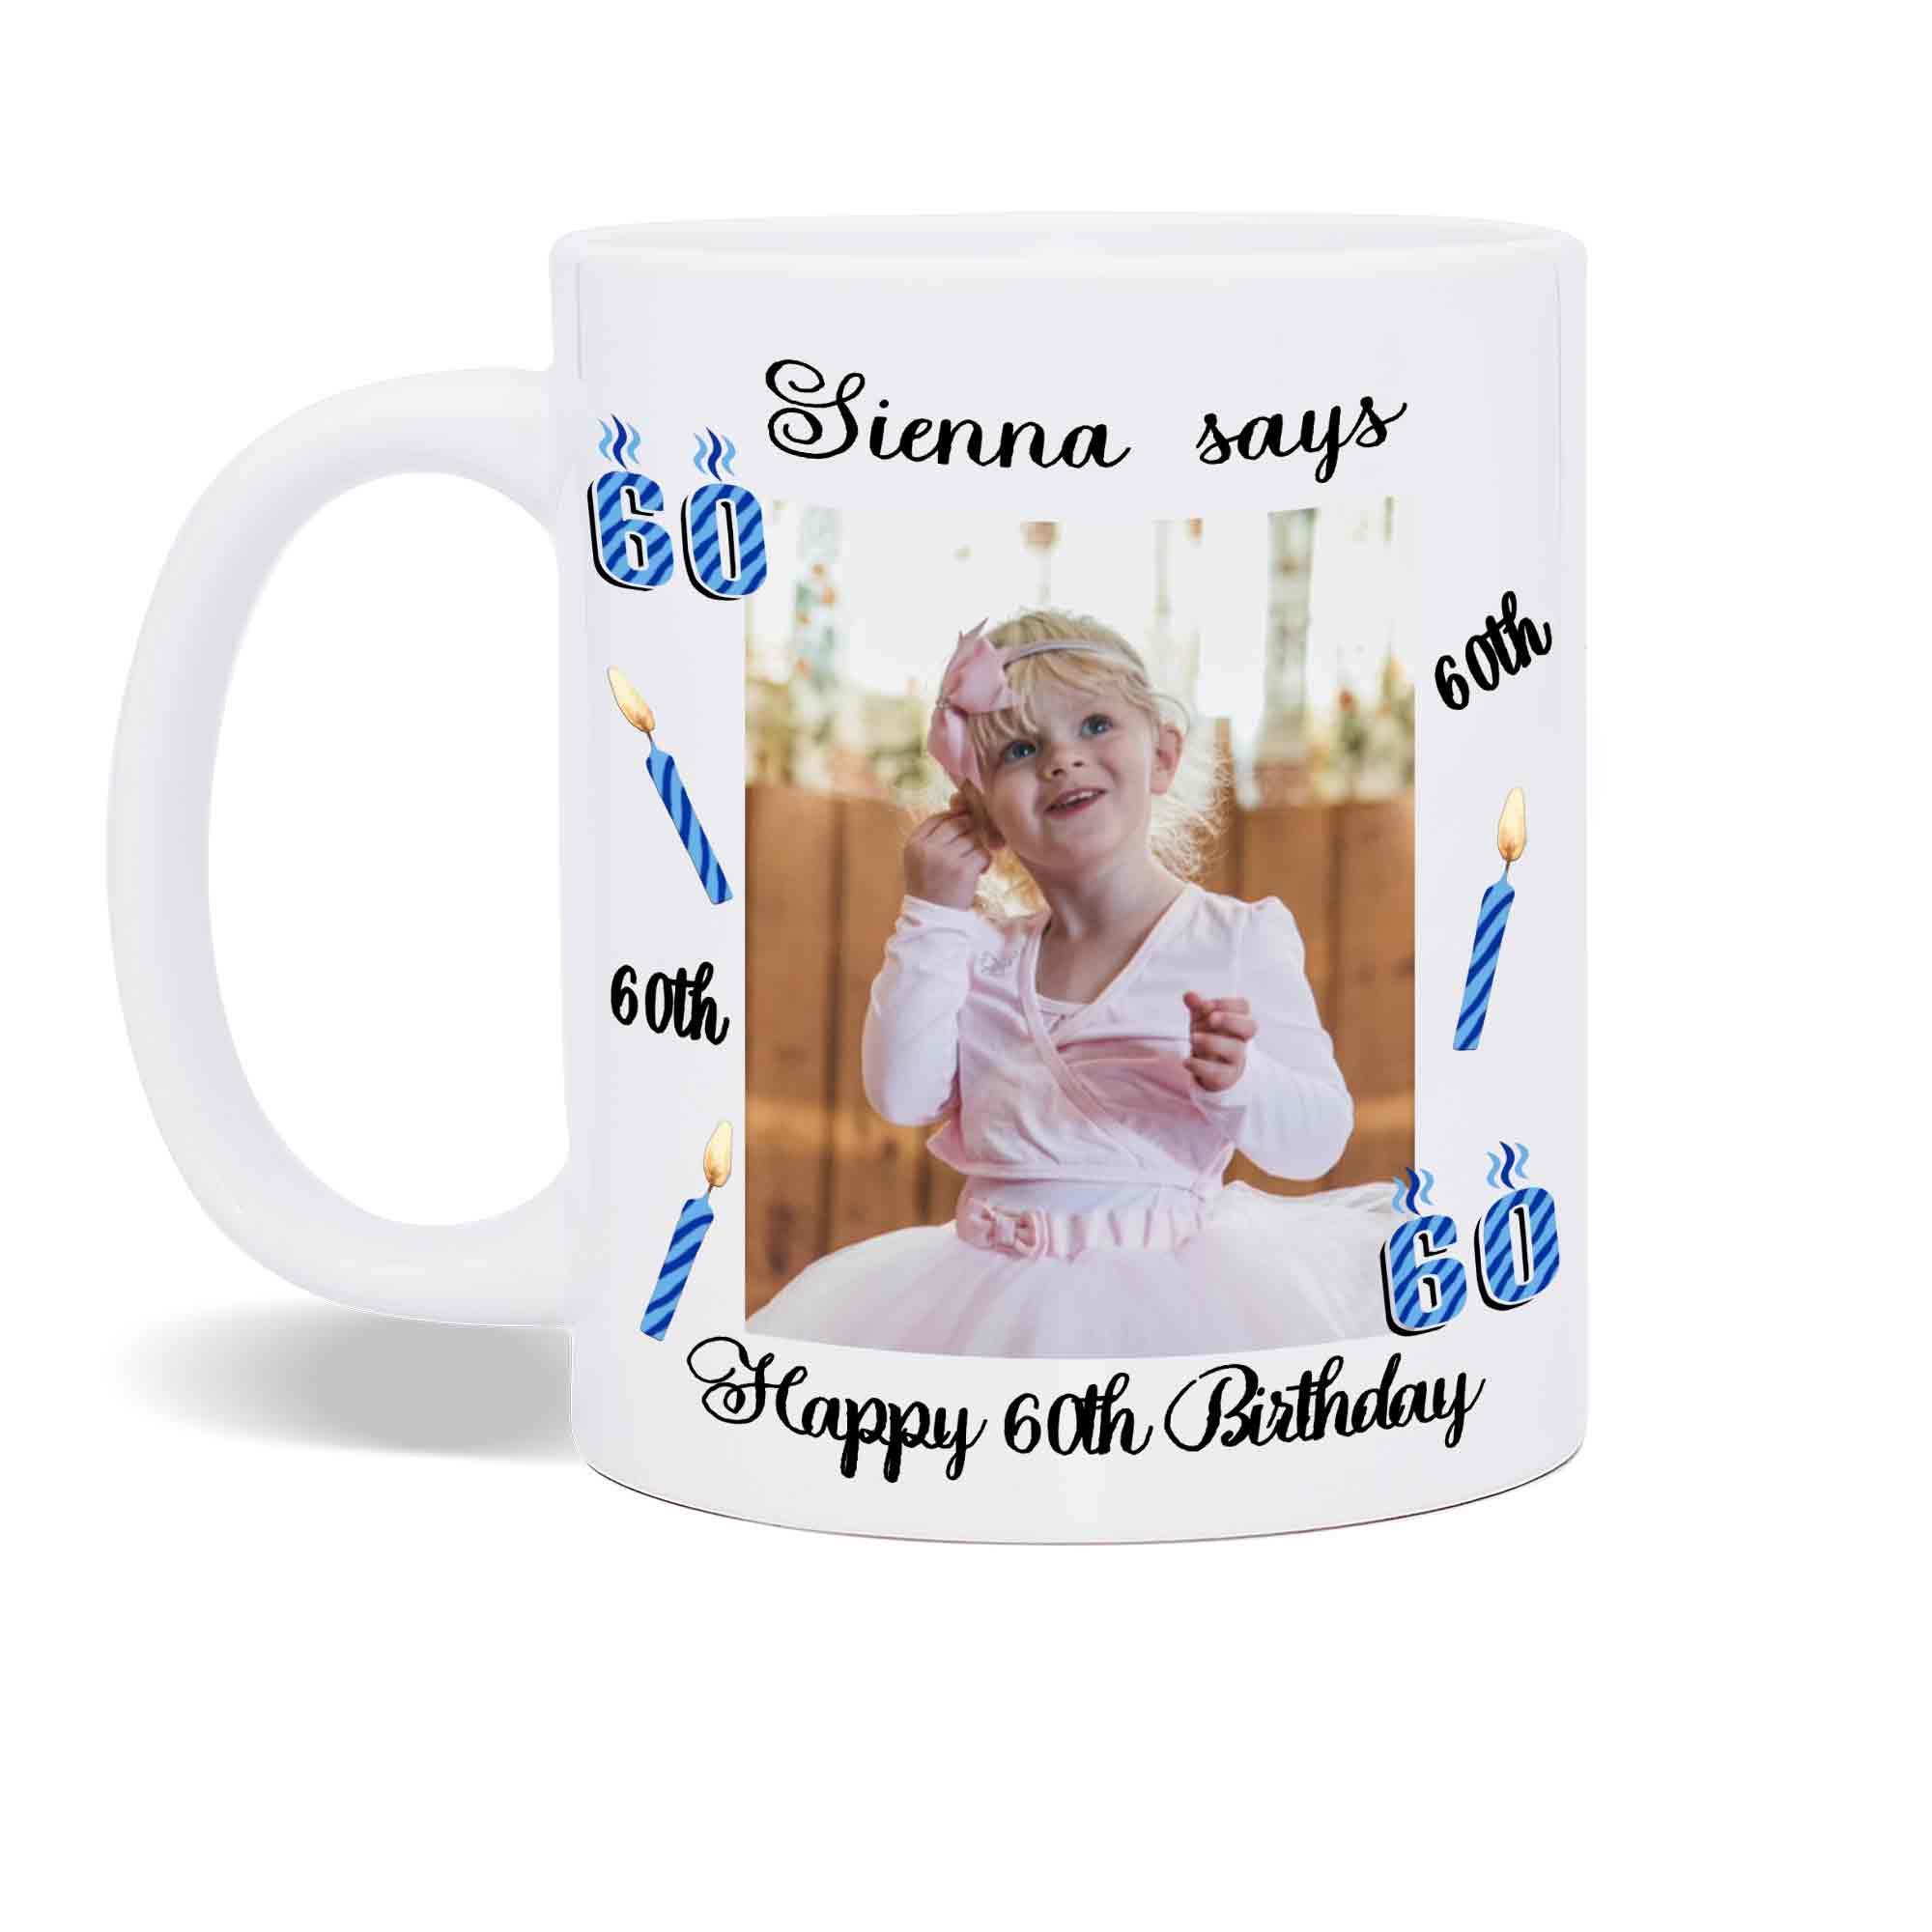 60th Birthday Gifts for Women, Funny 60th Birthday Hampers For Her Happy  60th Birthday Pamper Gifts Basket For Women, Female 60th Birthday Presents  Gifts Ideas for Women Best Friend, Sister, Wife, Mum :